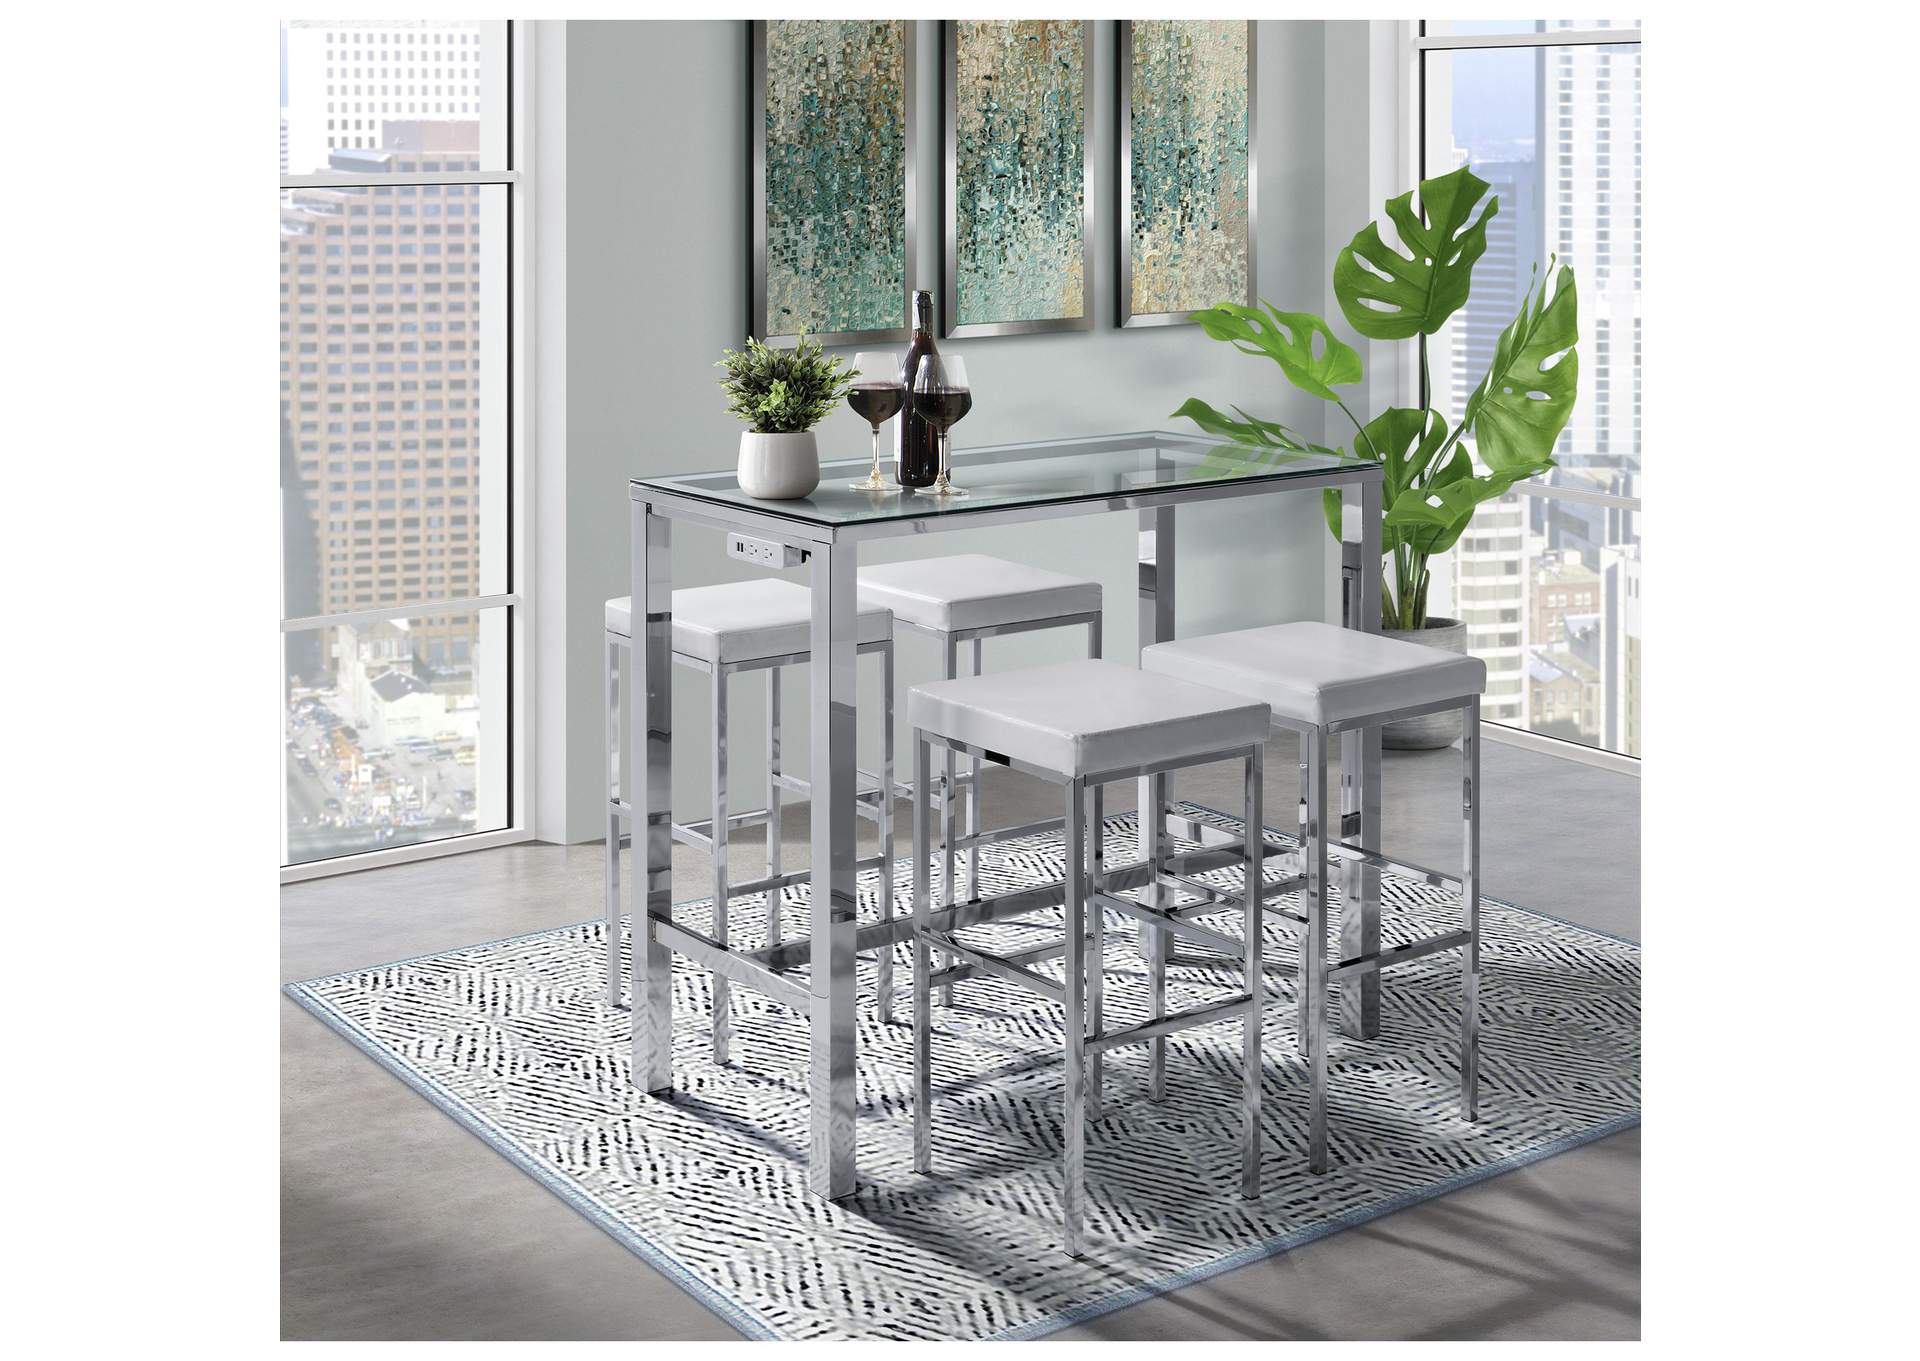 Lancy Bar Table Single Pack Table Four Stools,Elements